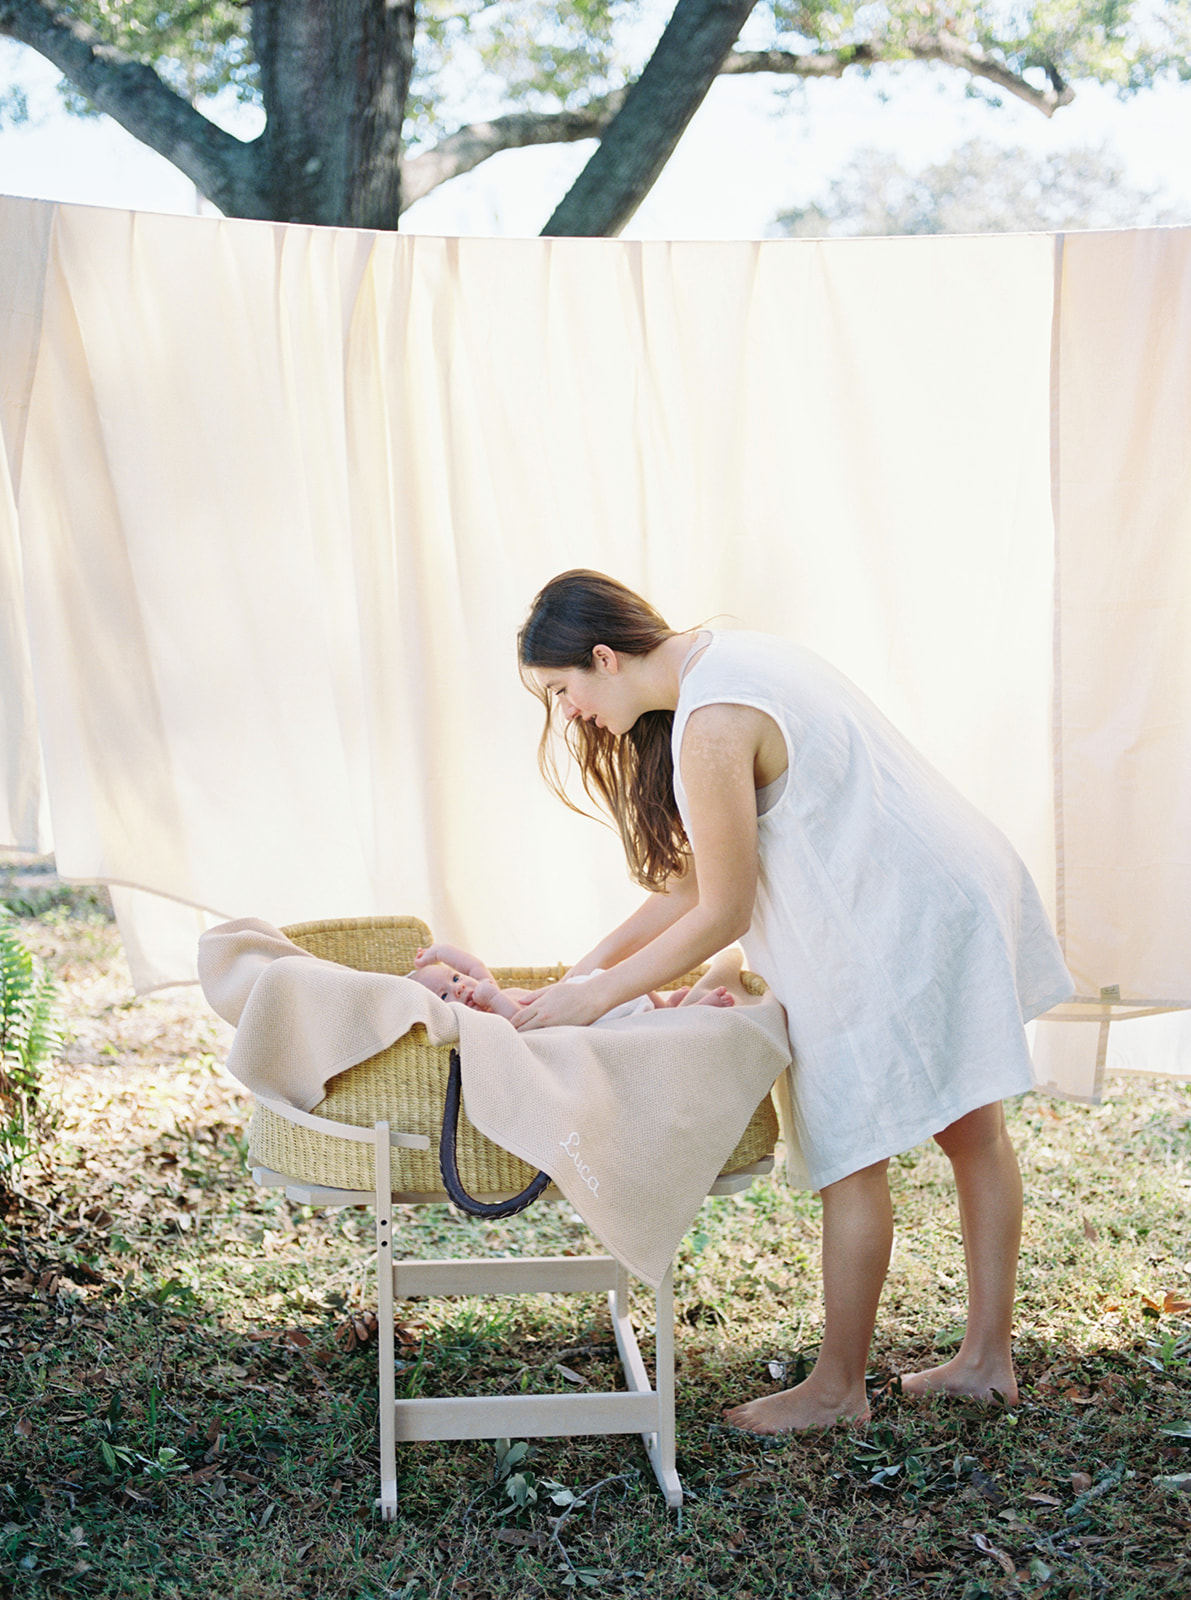 Mom dressed in short linen dress lifting baby out of organic woven moses basket during newborn portrait session.